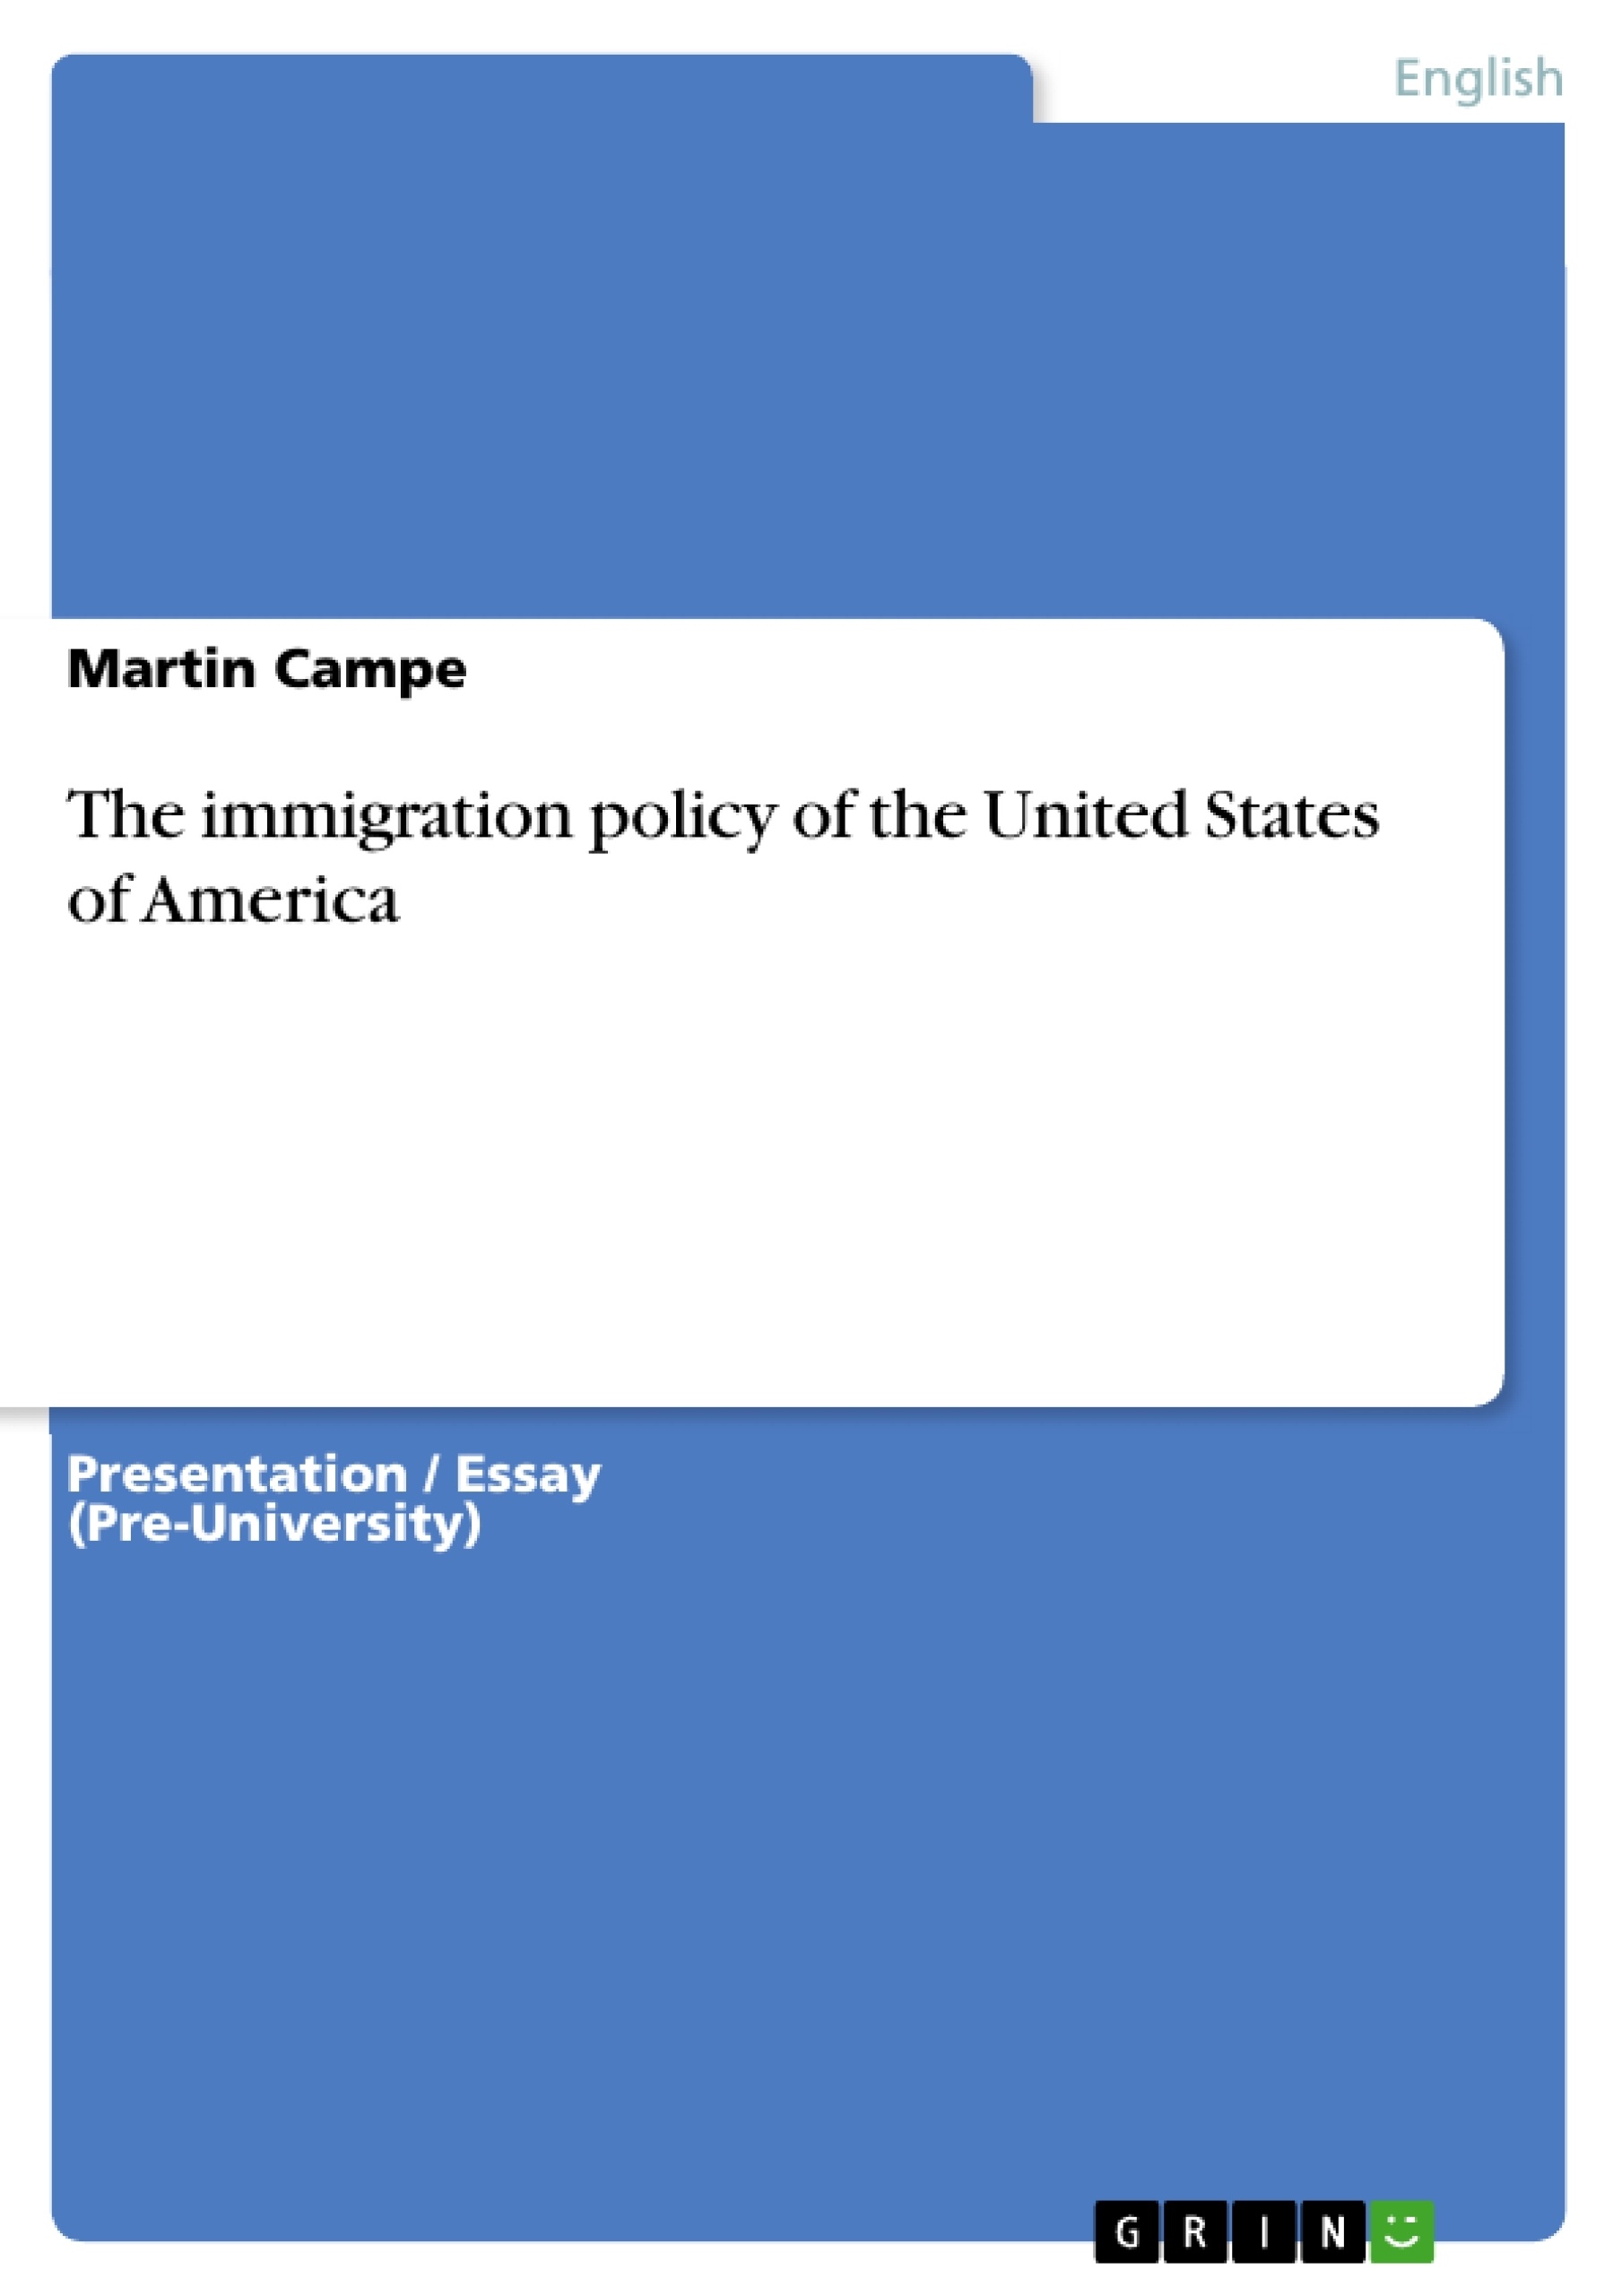 Title: The immigration policy of the United States of America